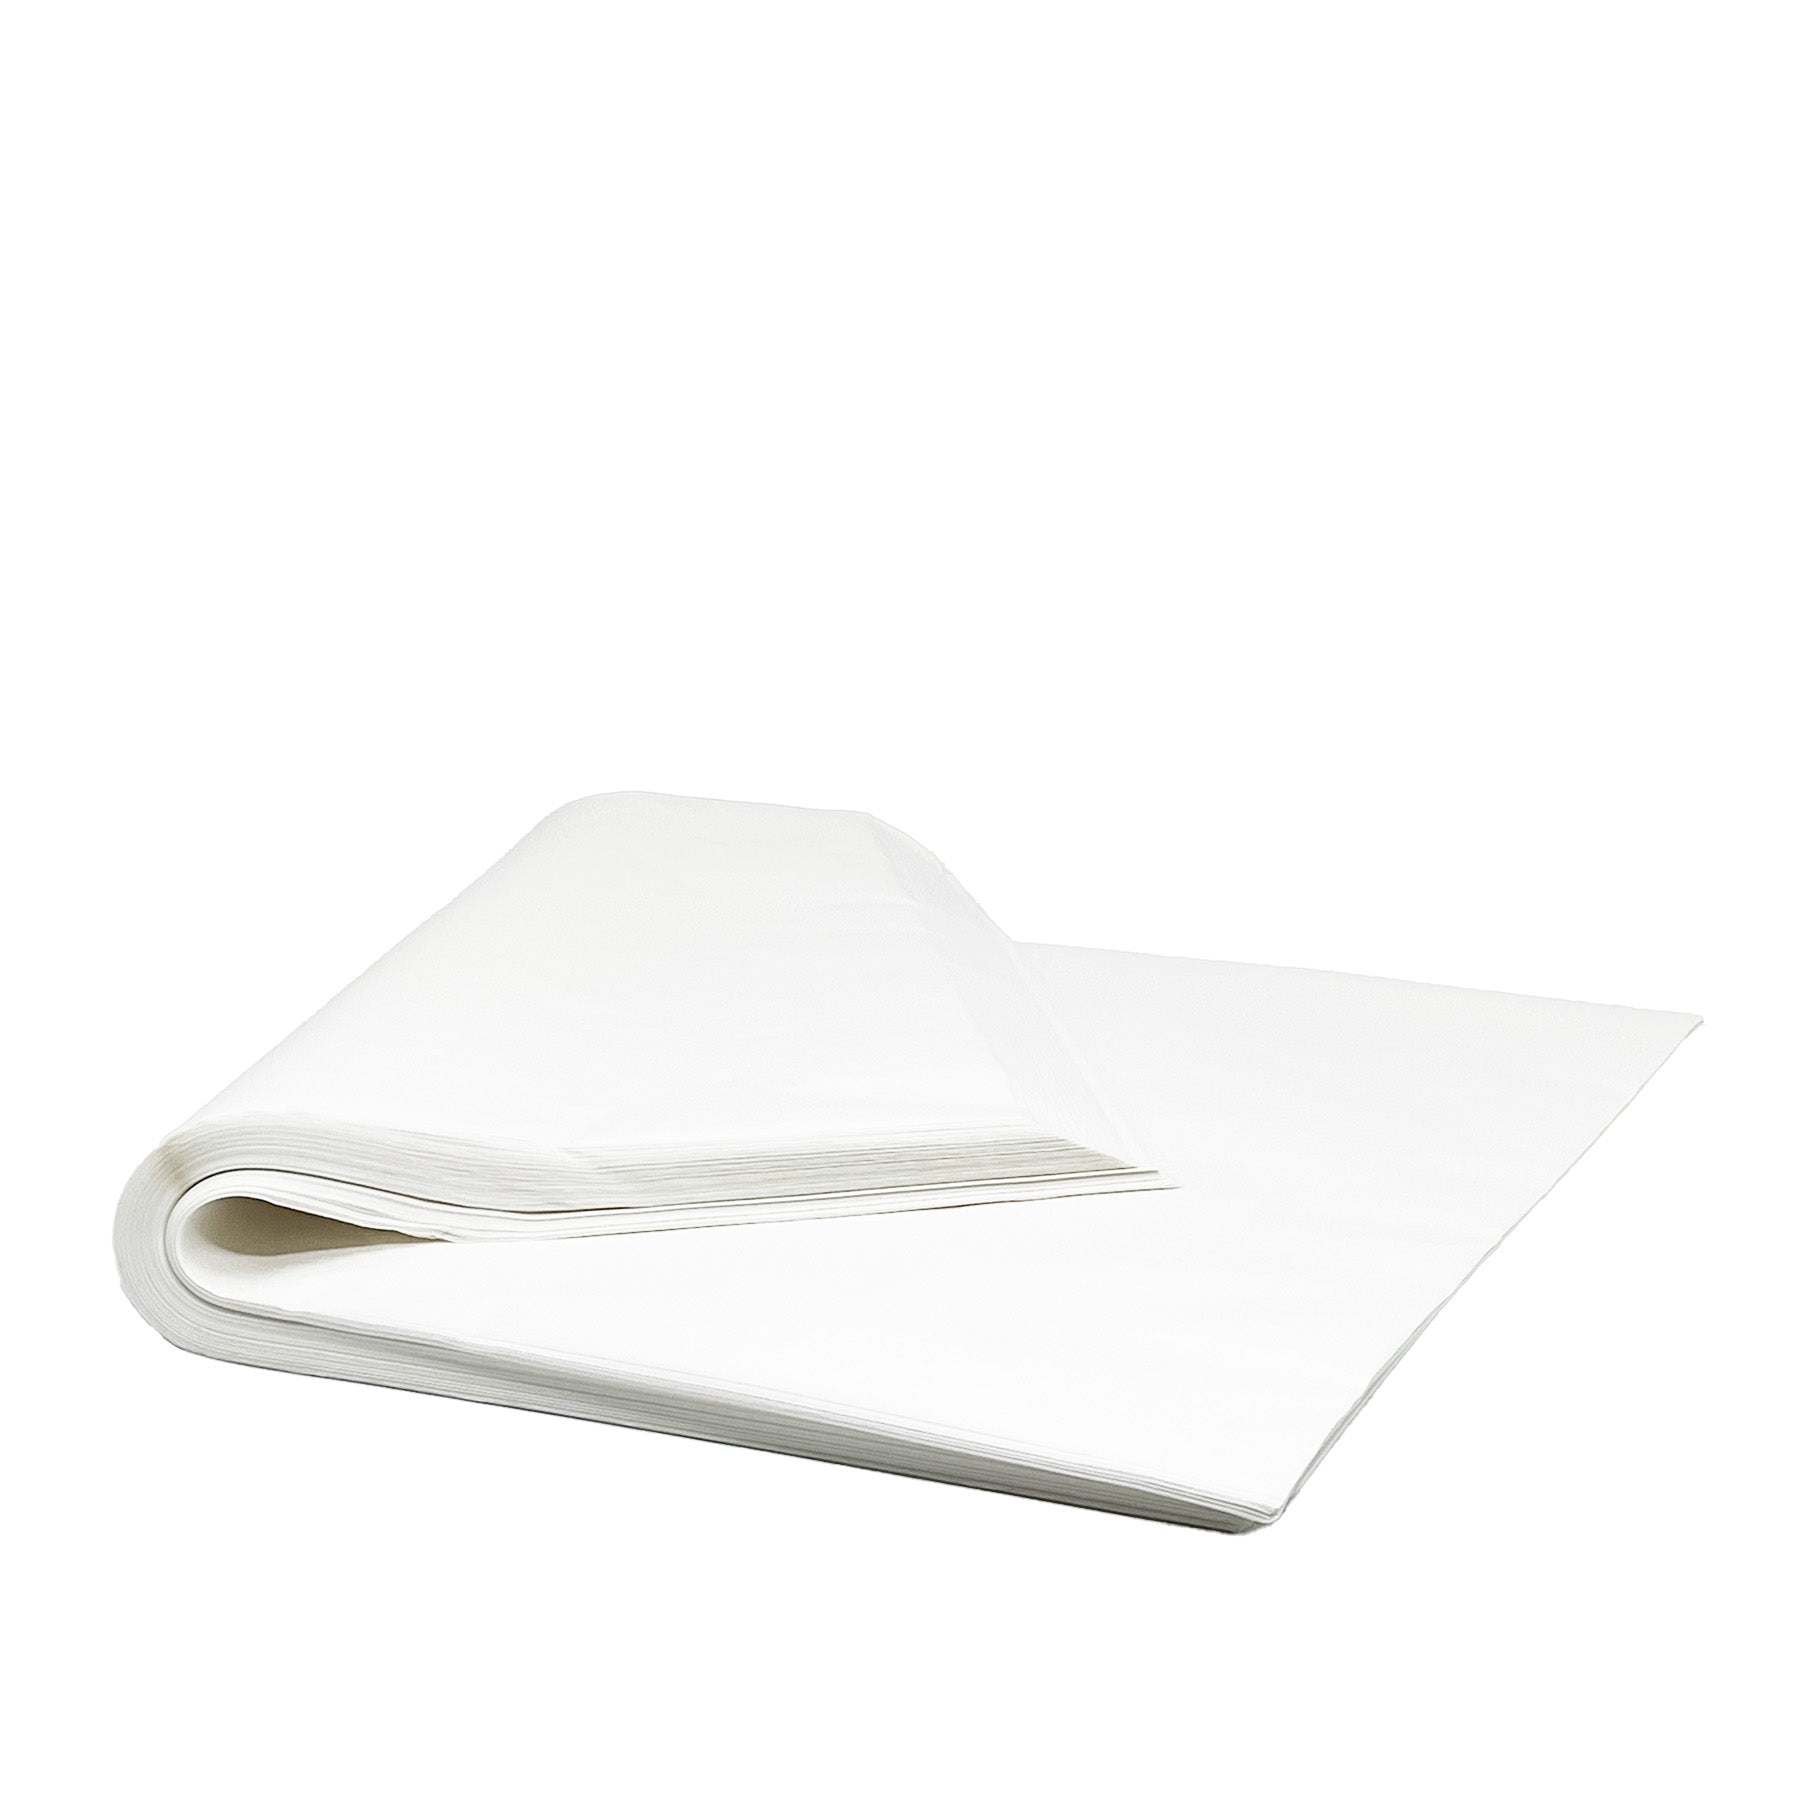 1/2 (330x400mm) White Bleached Greaseproof Paper Sheets